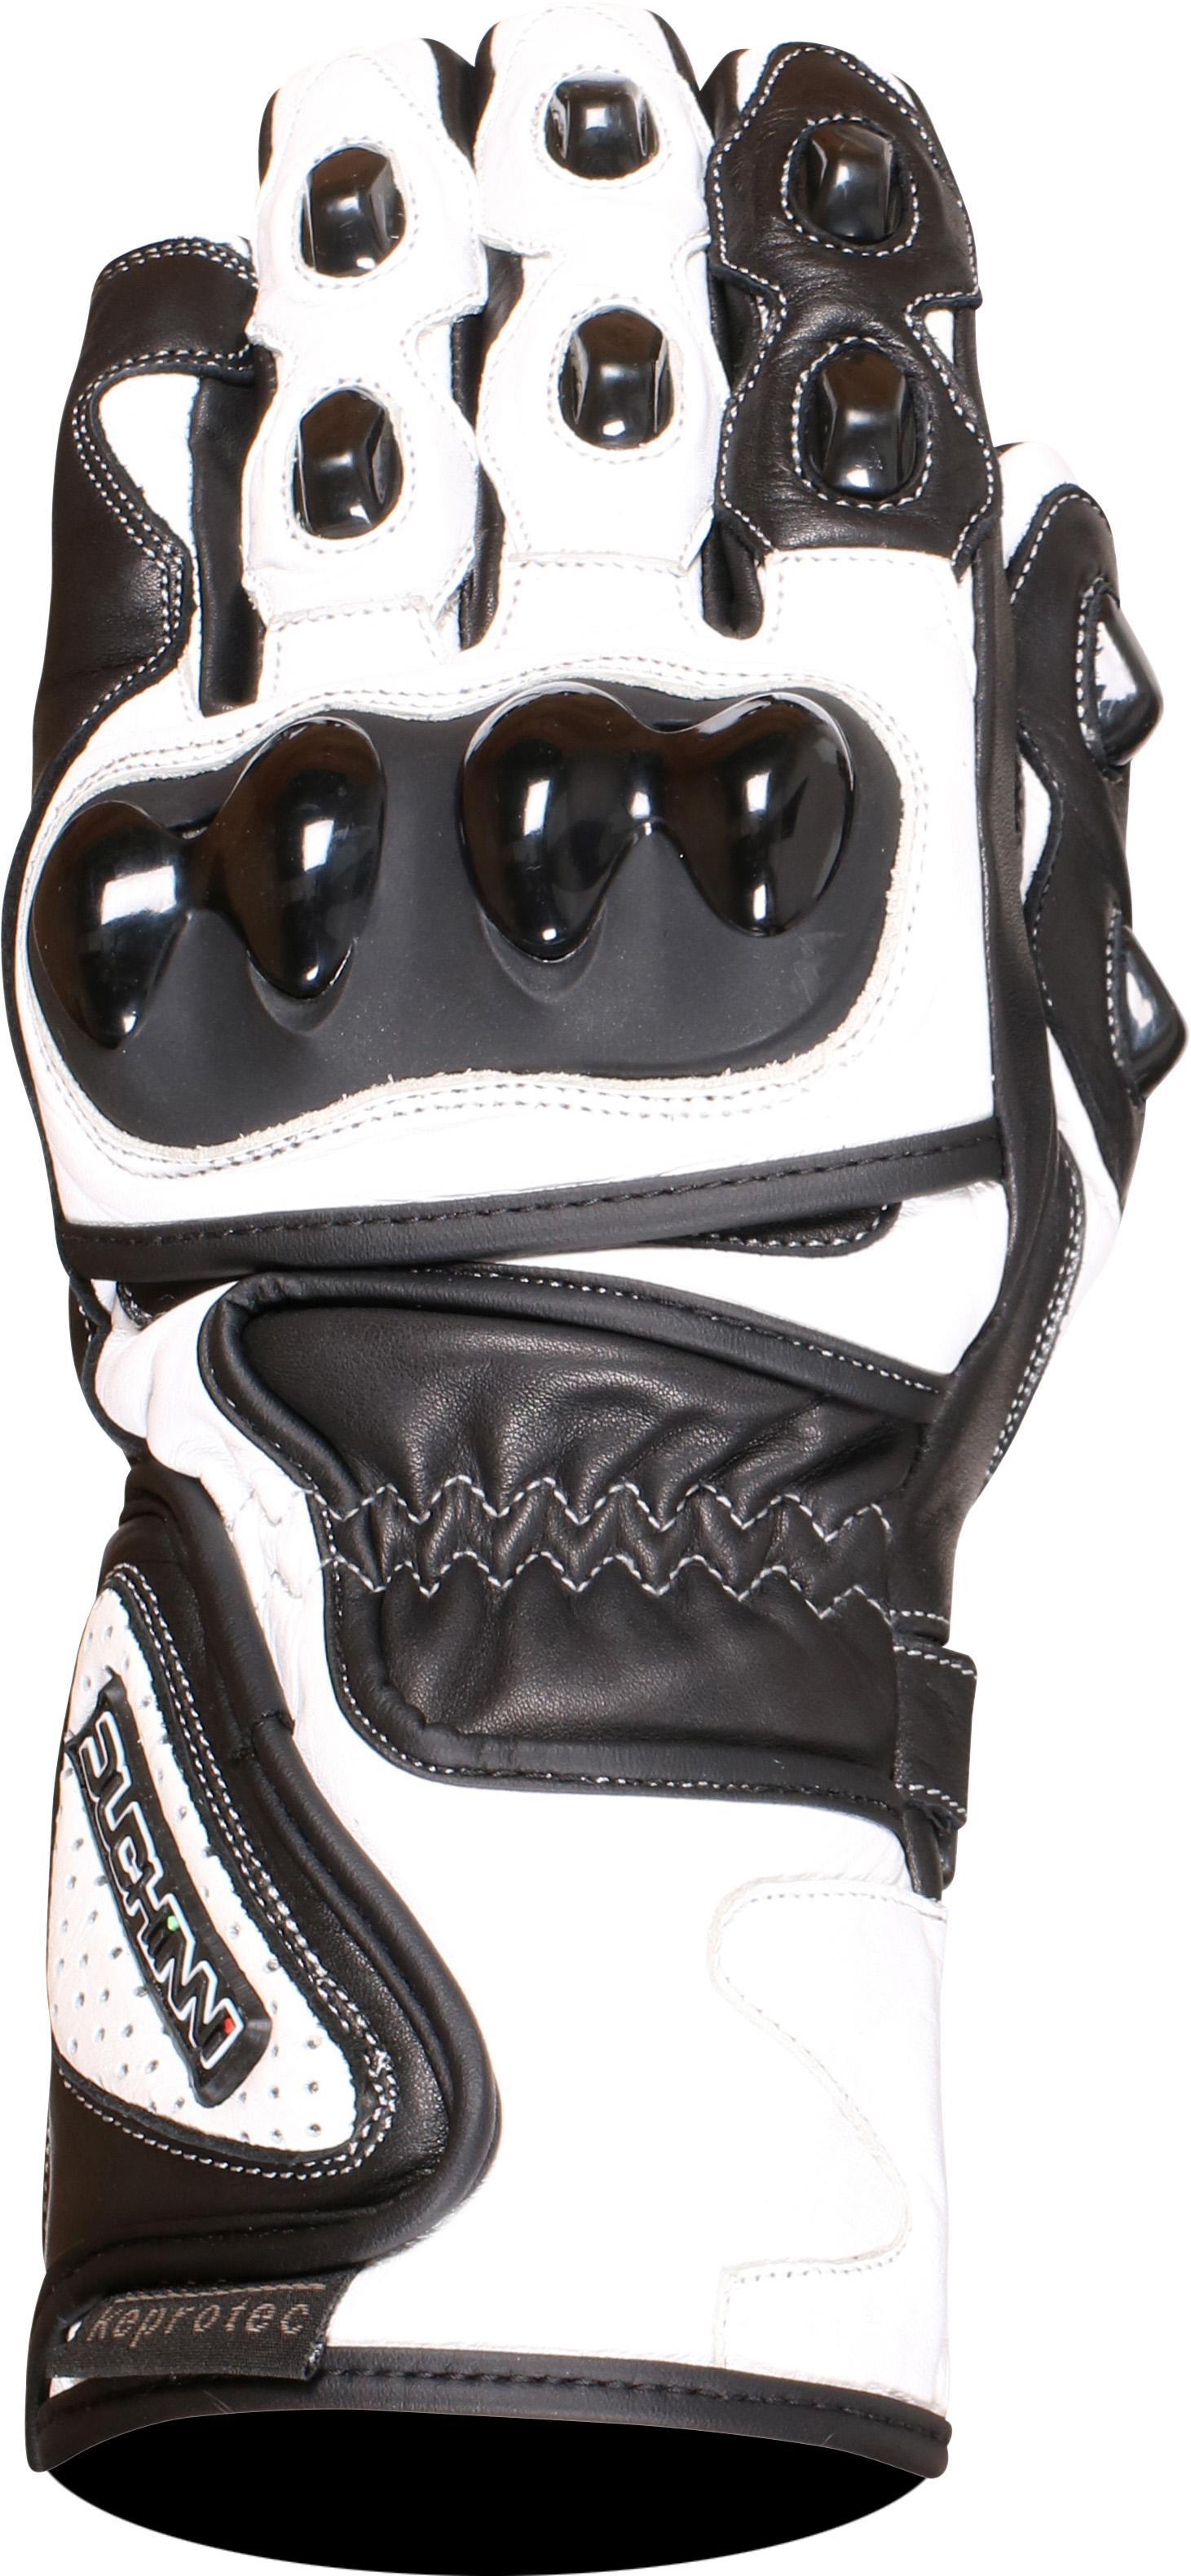 Duchinni Dr1 Motorcycle Gloves - Black And White, M